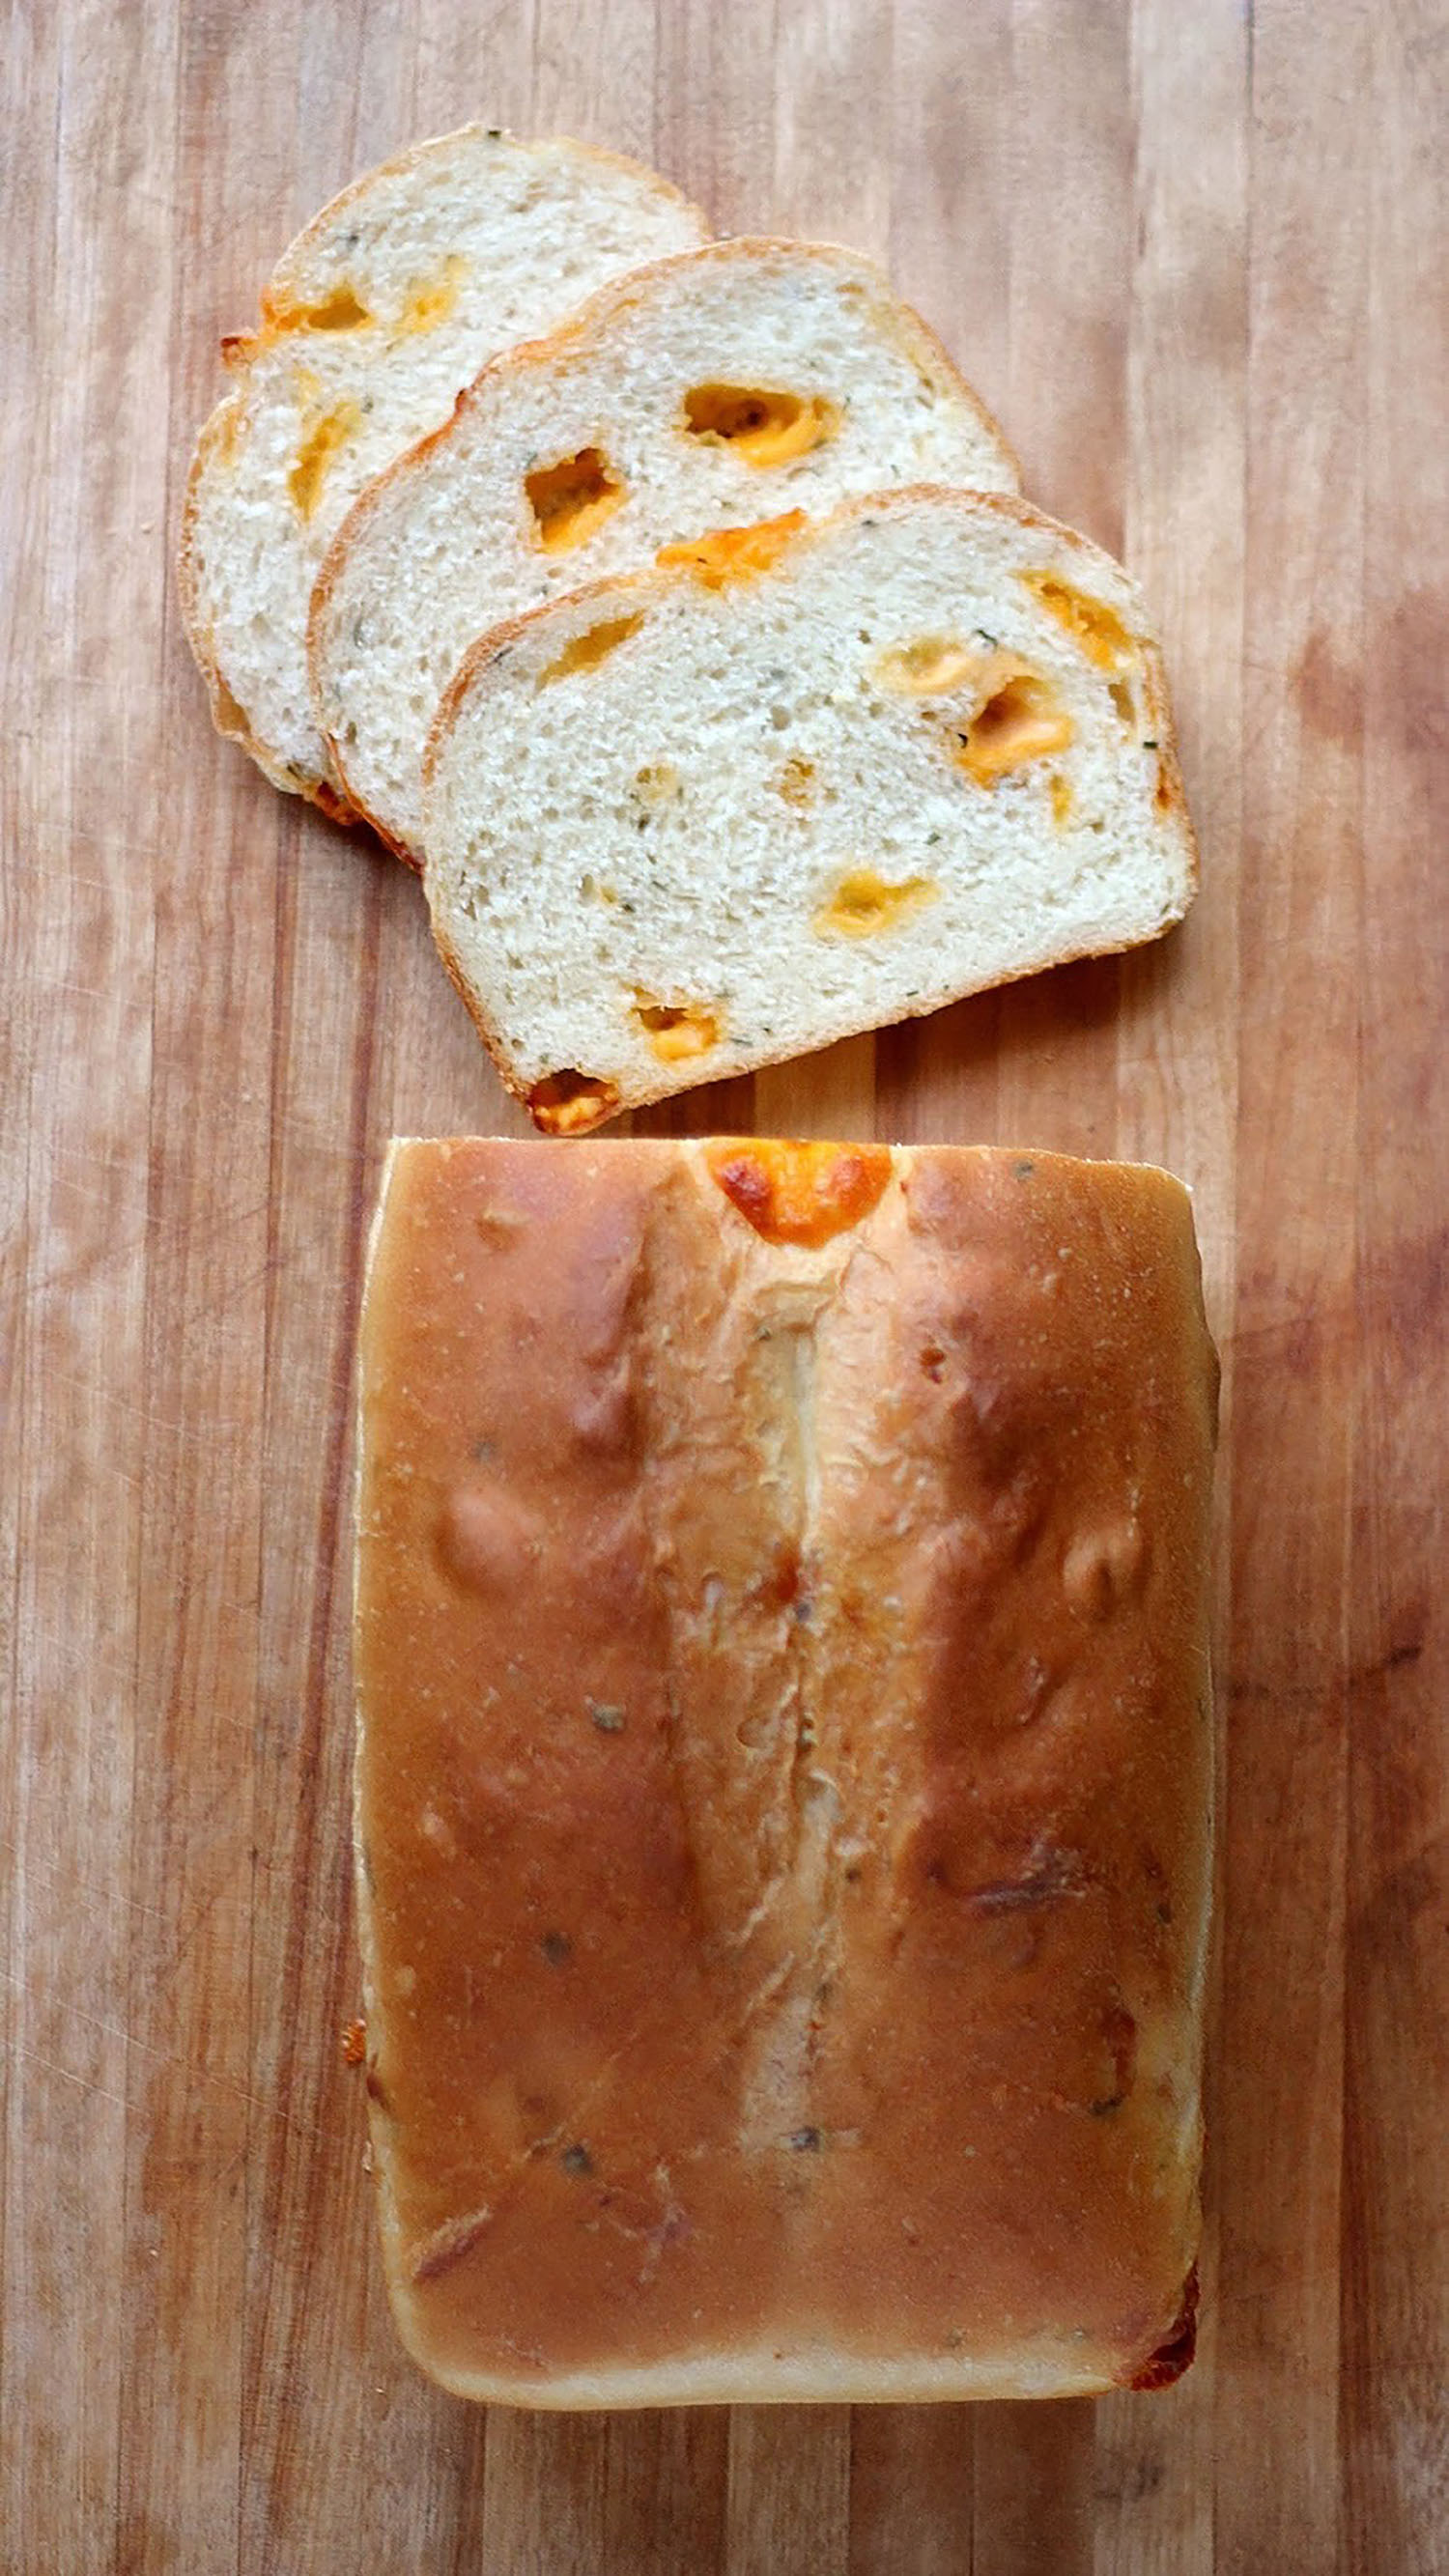 Cheddar-Chunk and Chive Sandwich Bread